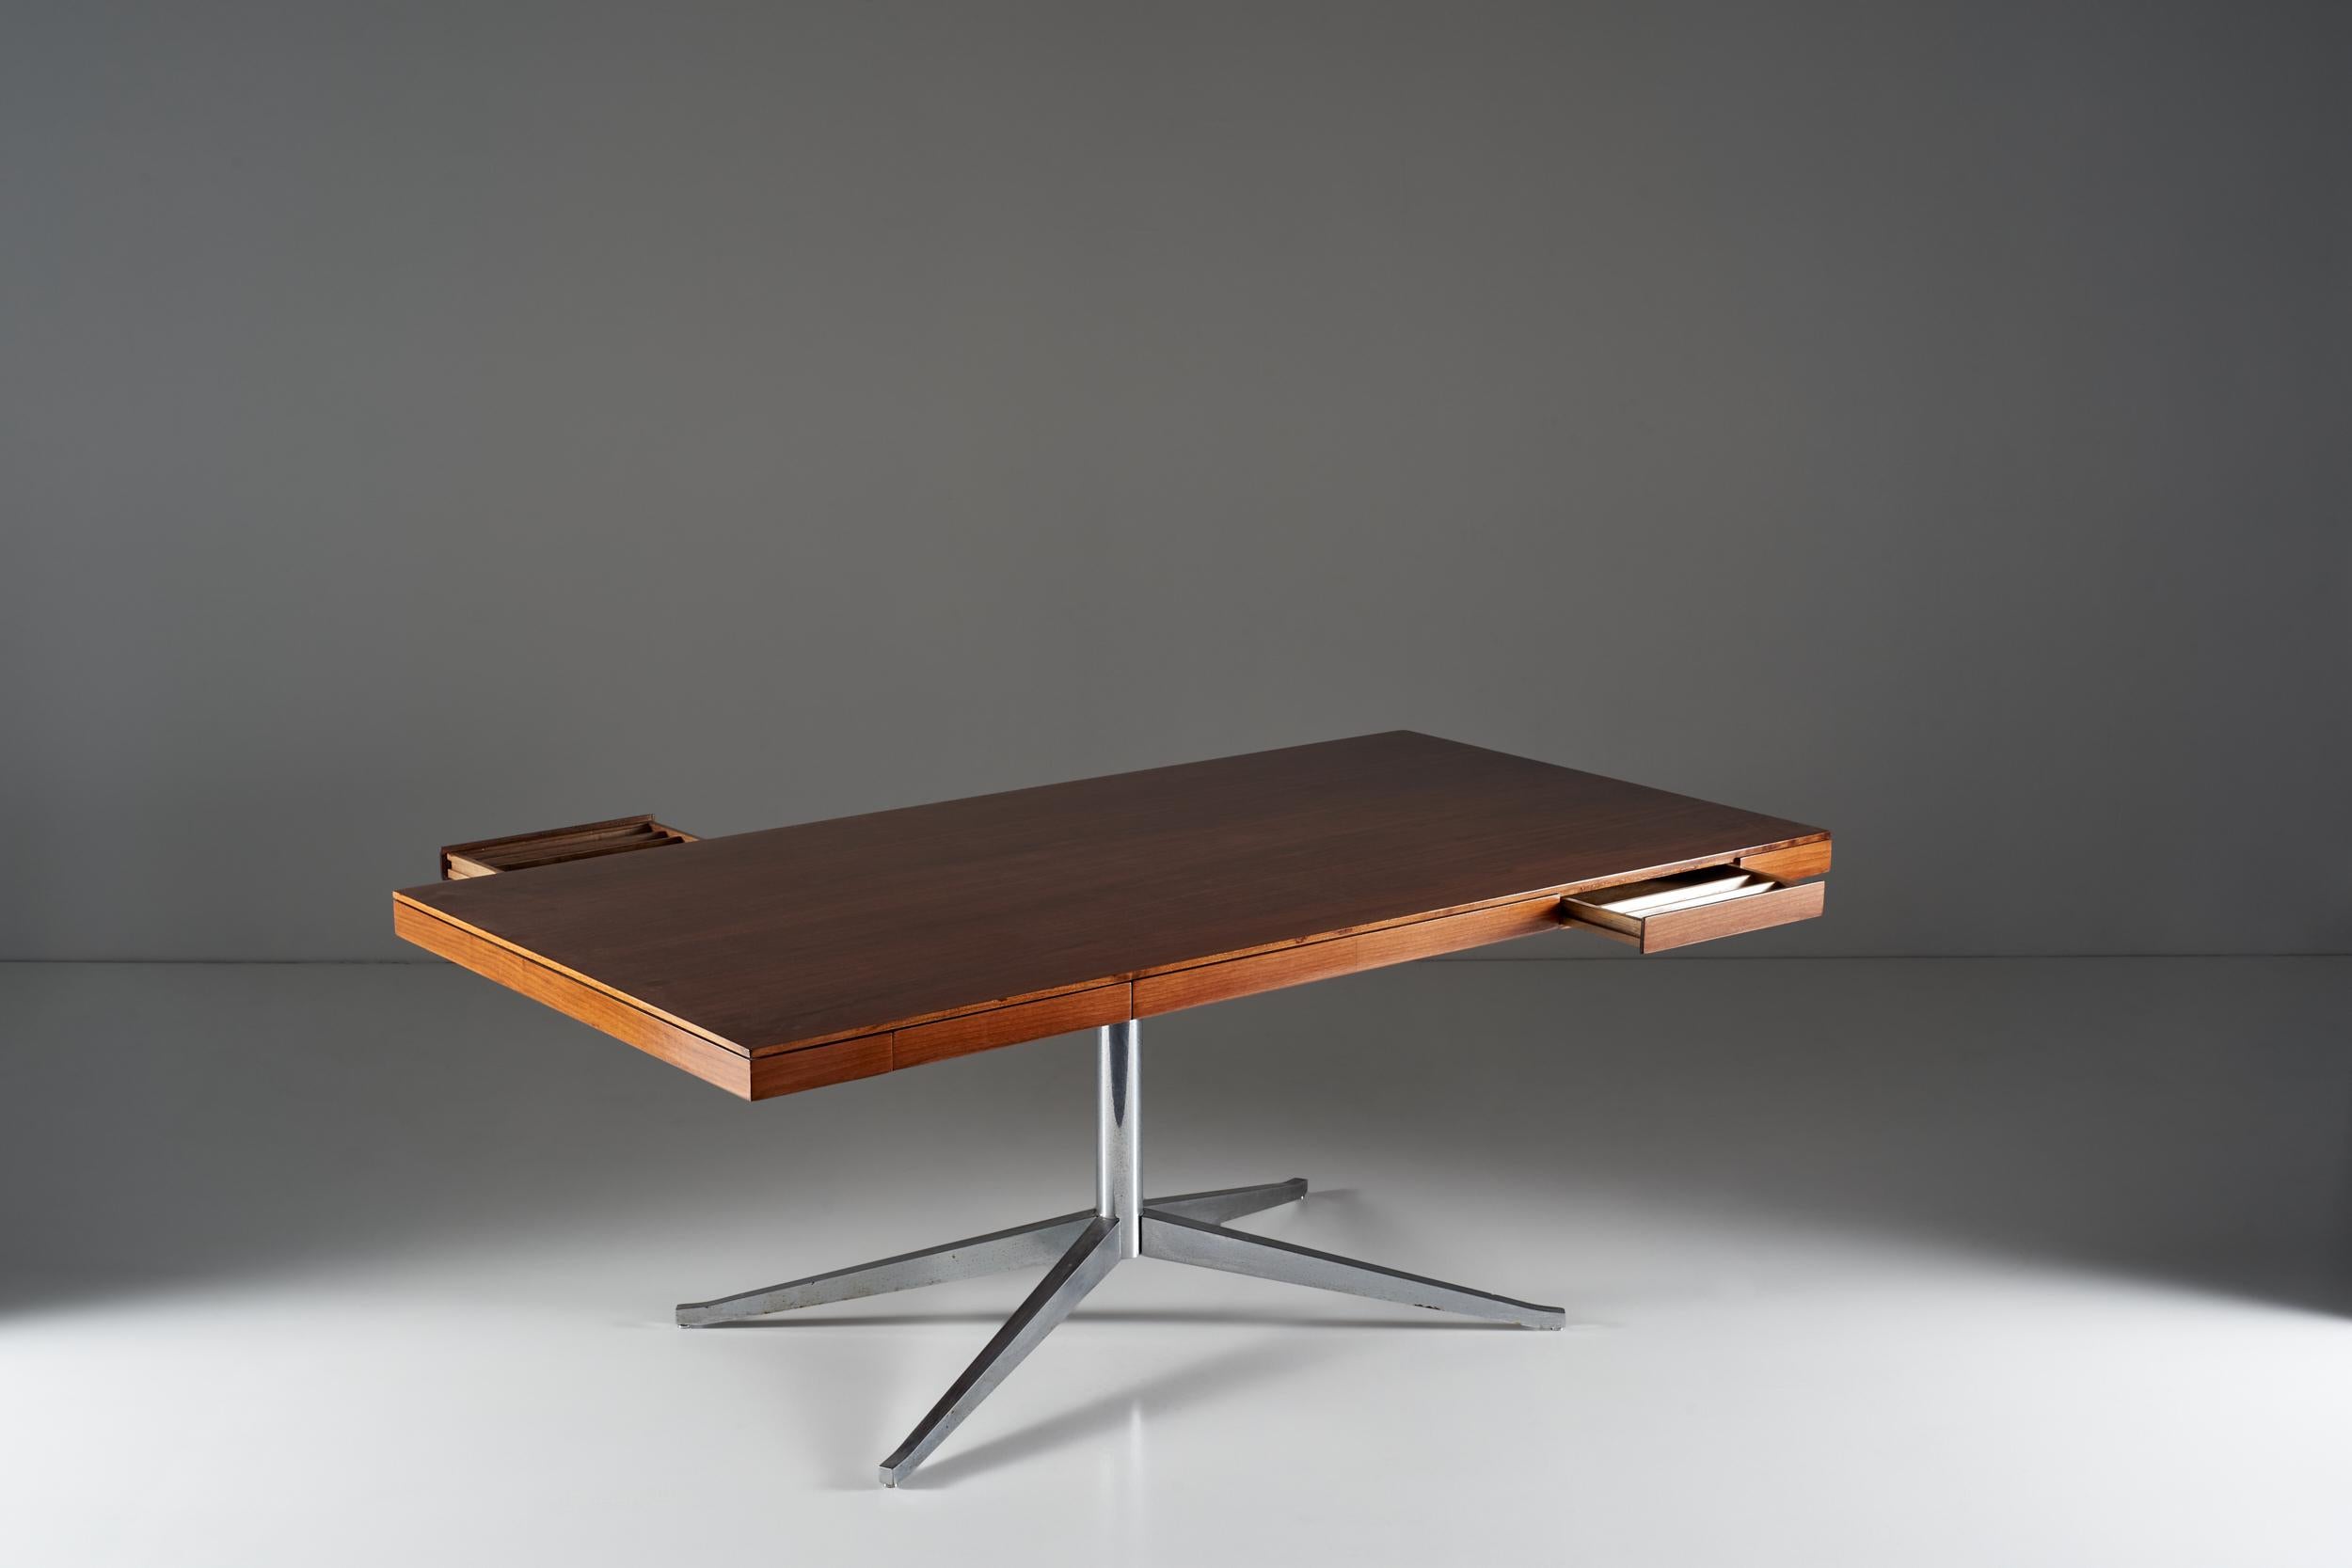 20th Century Florence Knoll Table with Chromed Iron Frame and Wooden Top, circa 1951